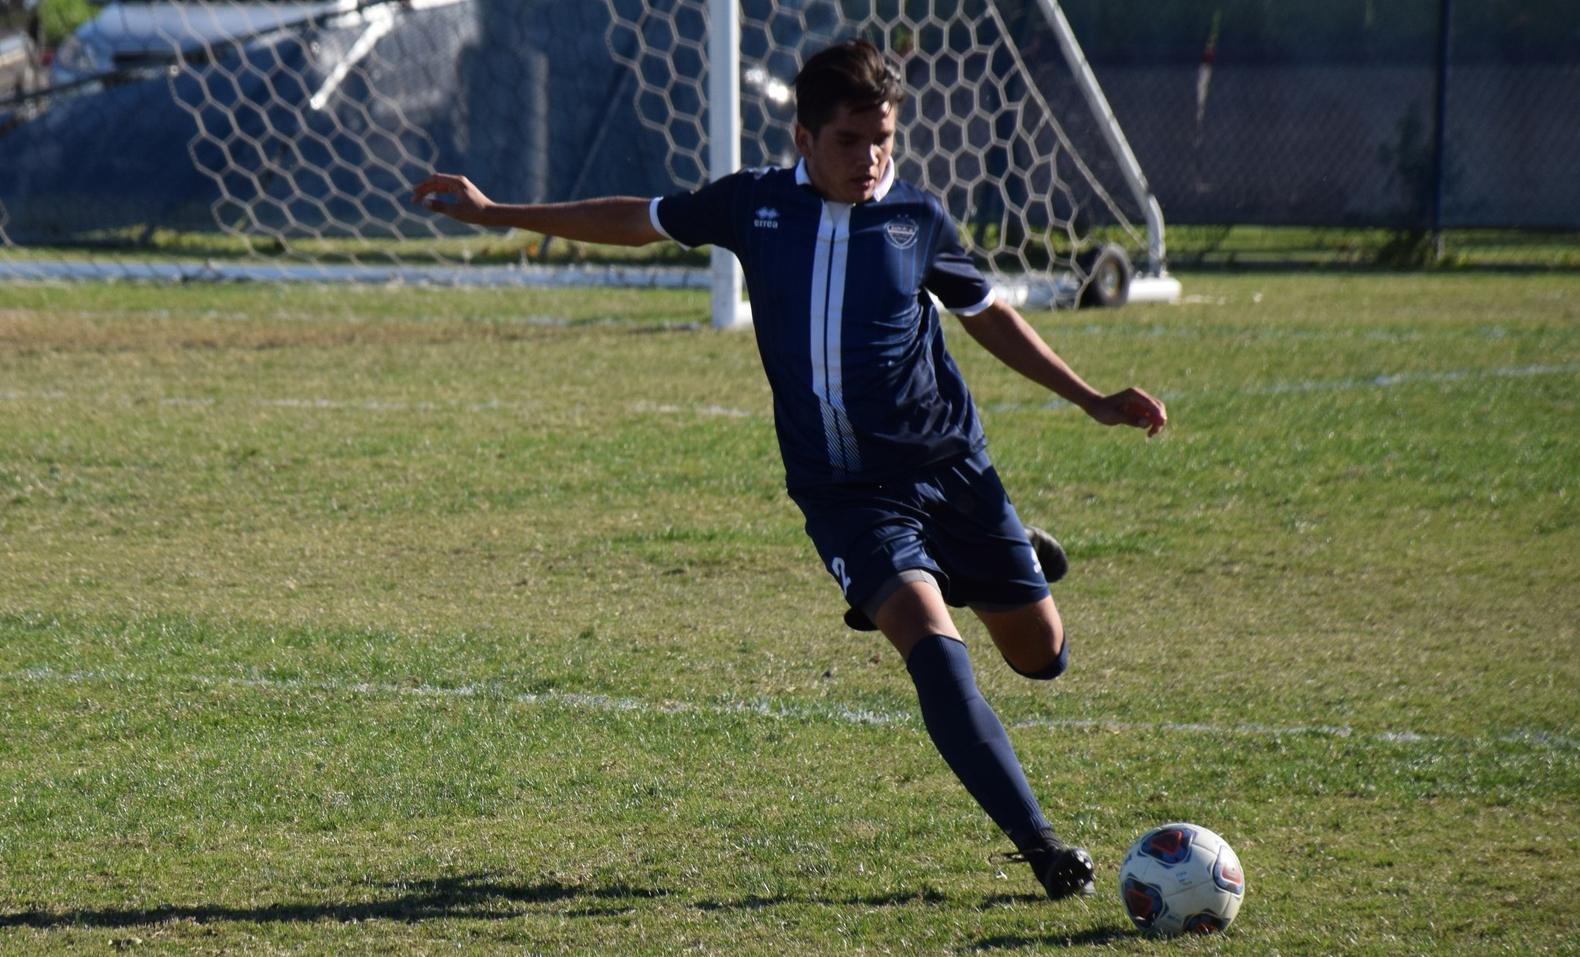 Men's soccer team edged, 2-1, by Golden West at home